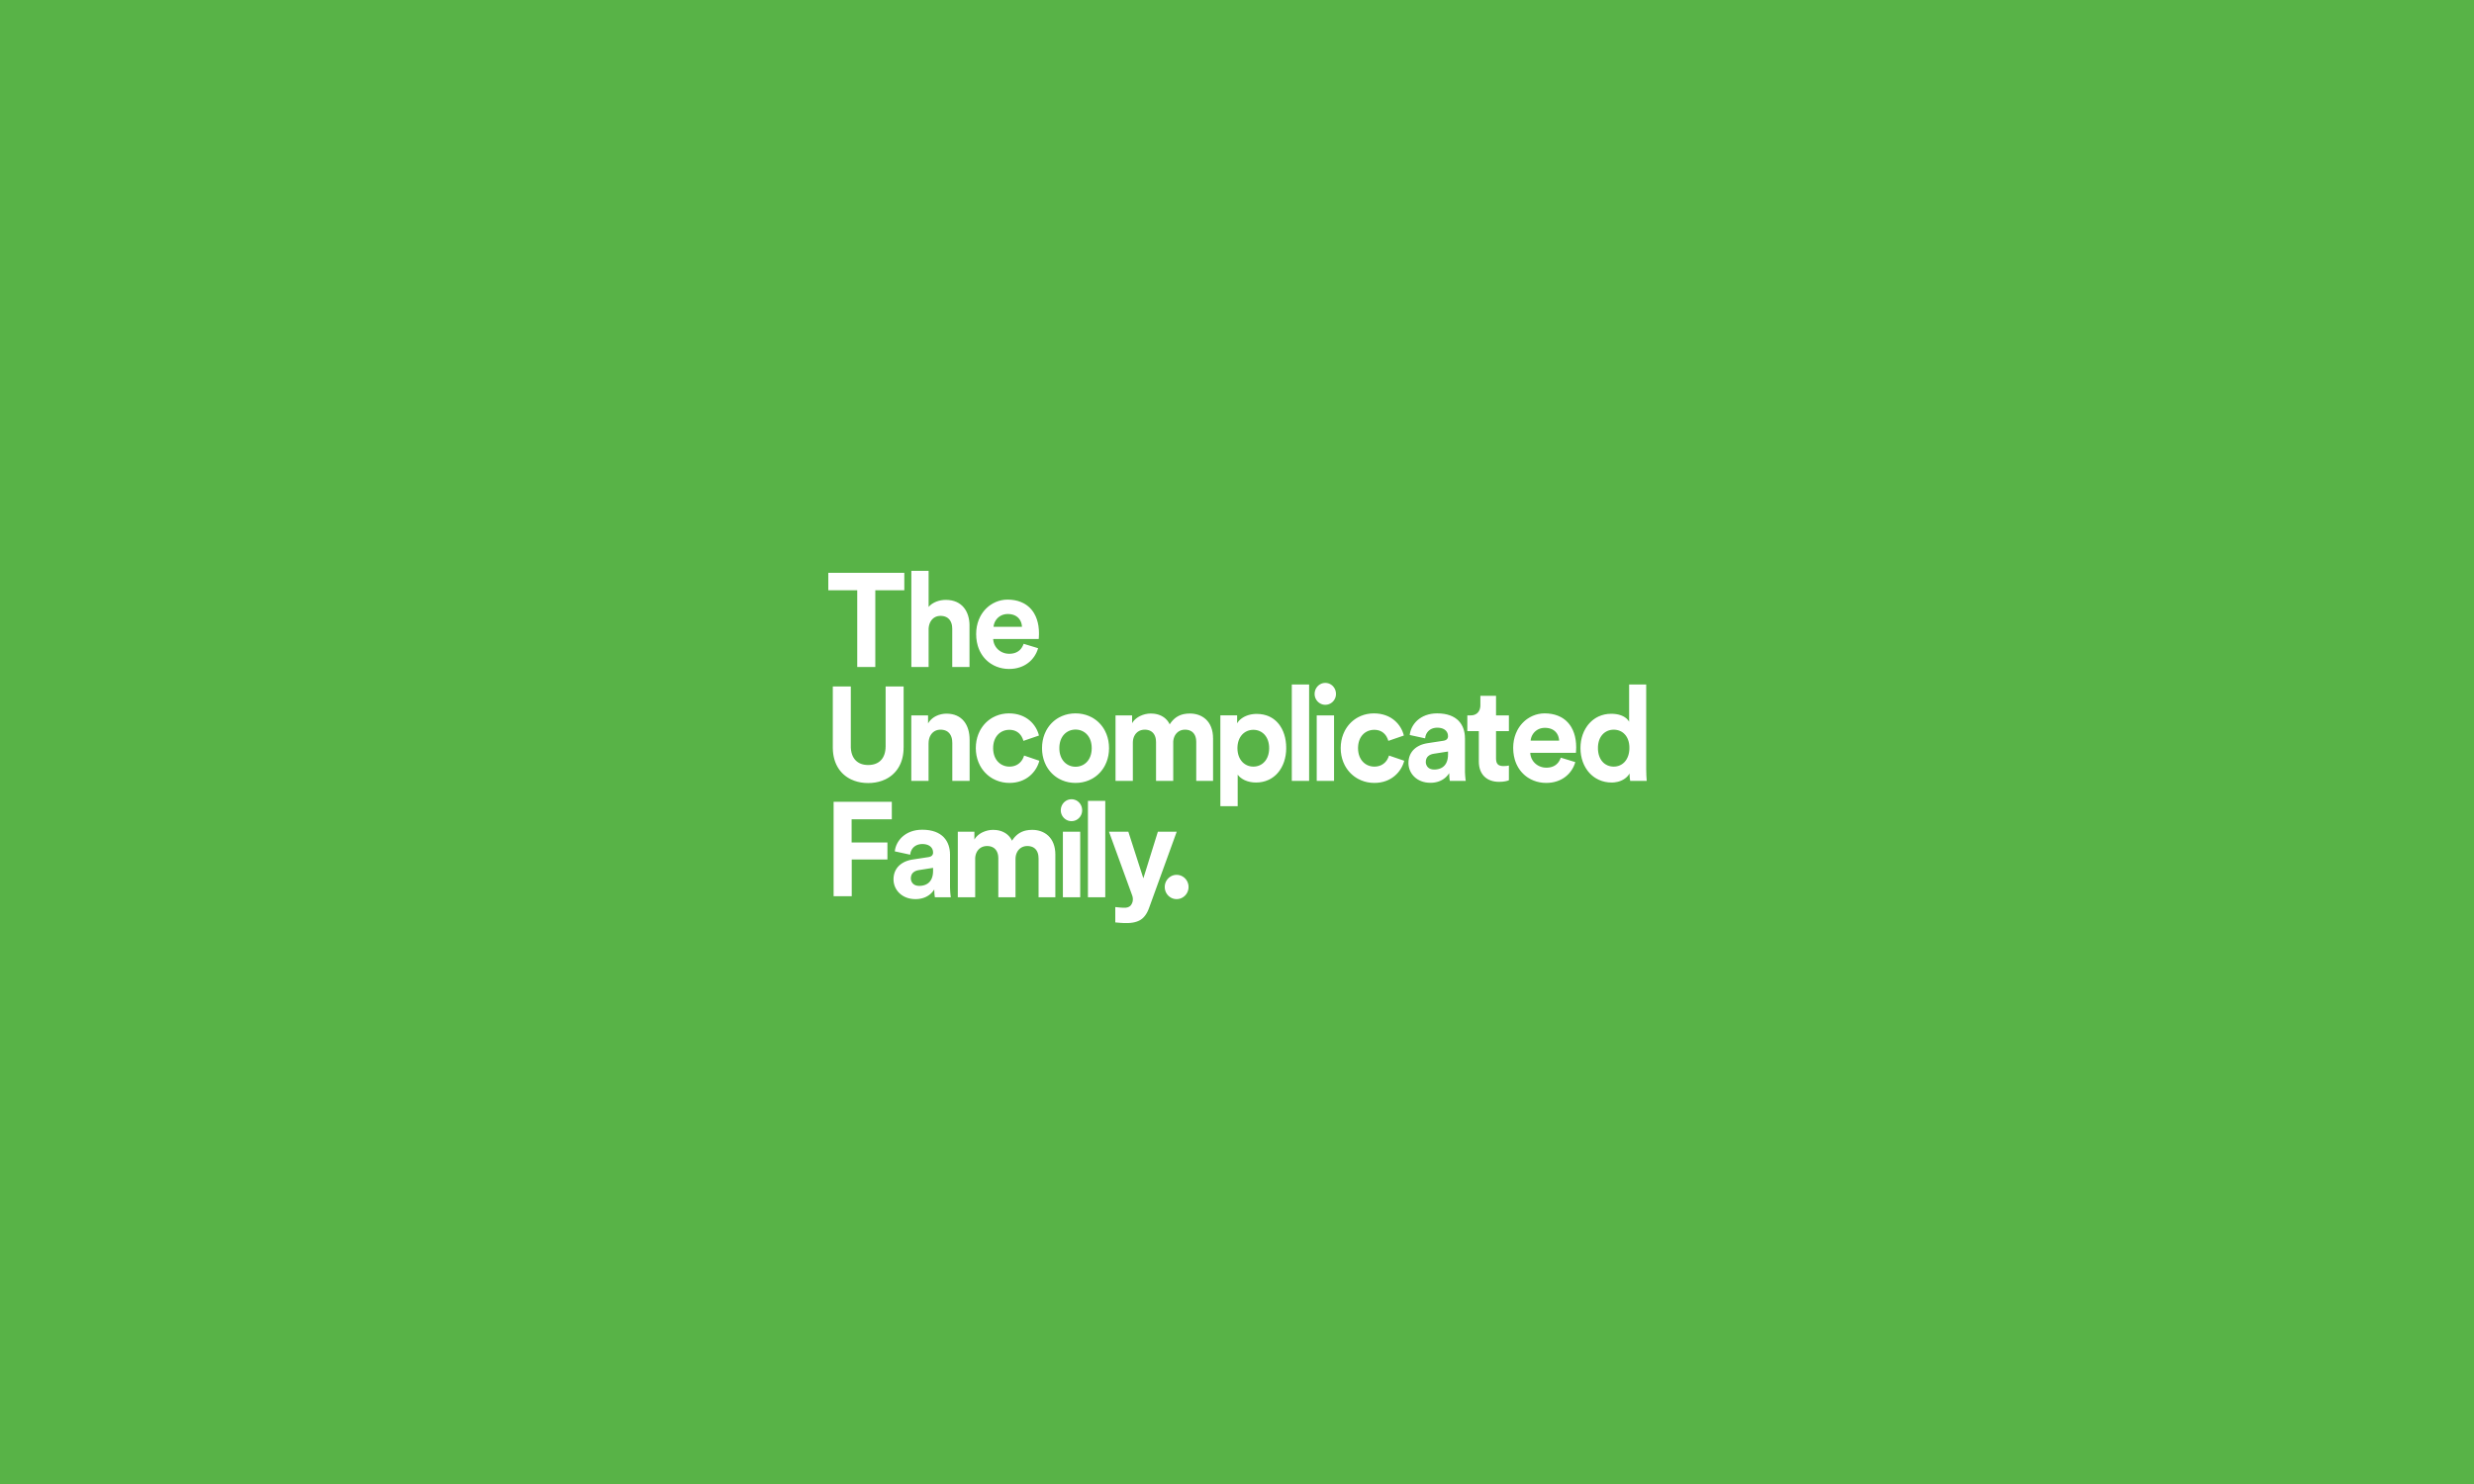 THE UNCOMPLICATED FAMILY™ GROUP OFFERS DIGITAL HEALTHCARE DELIVERY SOLUTIONS AMID COVID-19 OUTBREAK